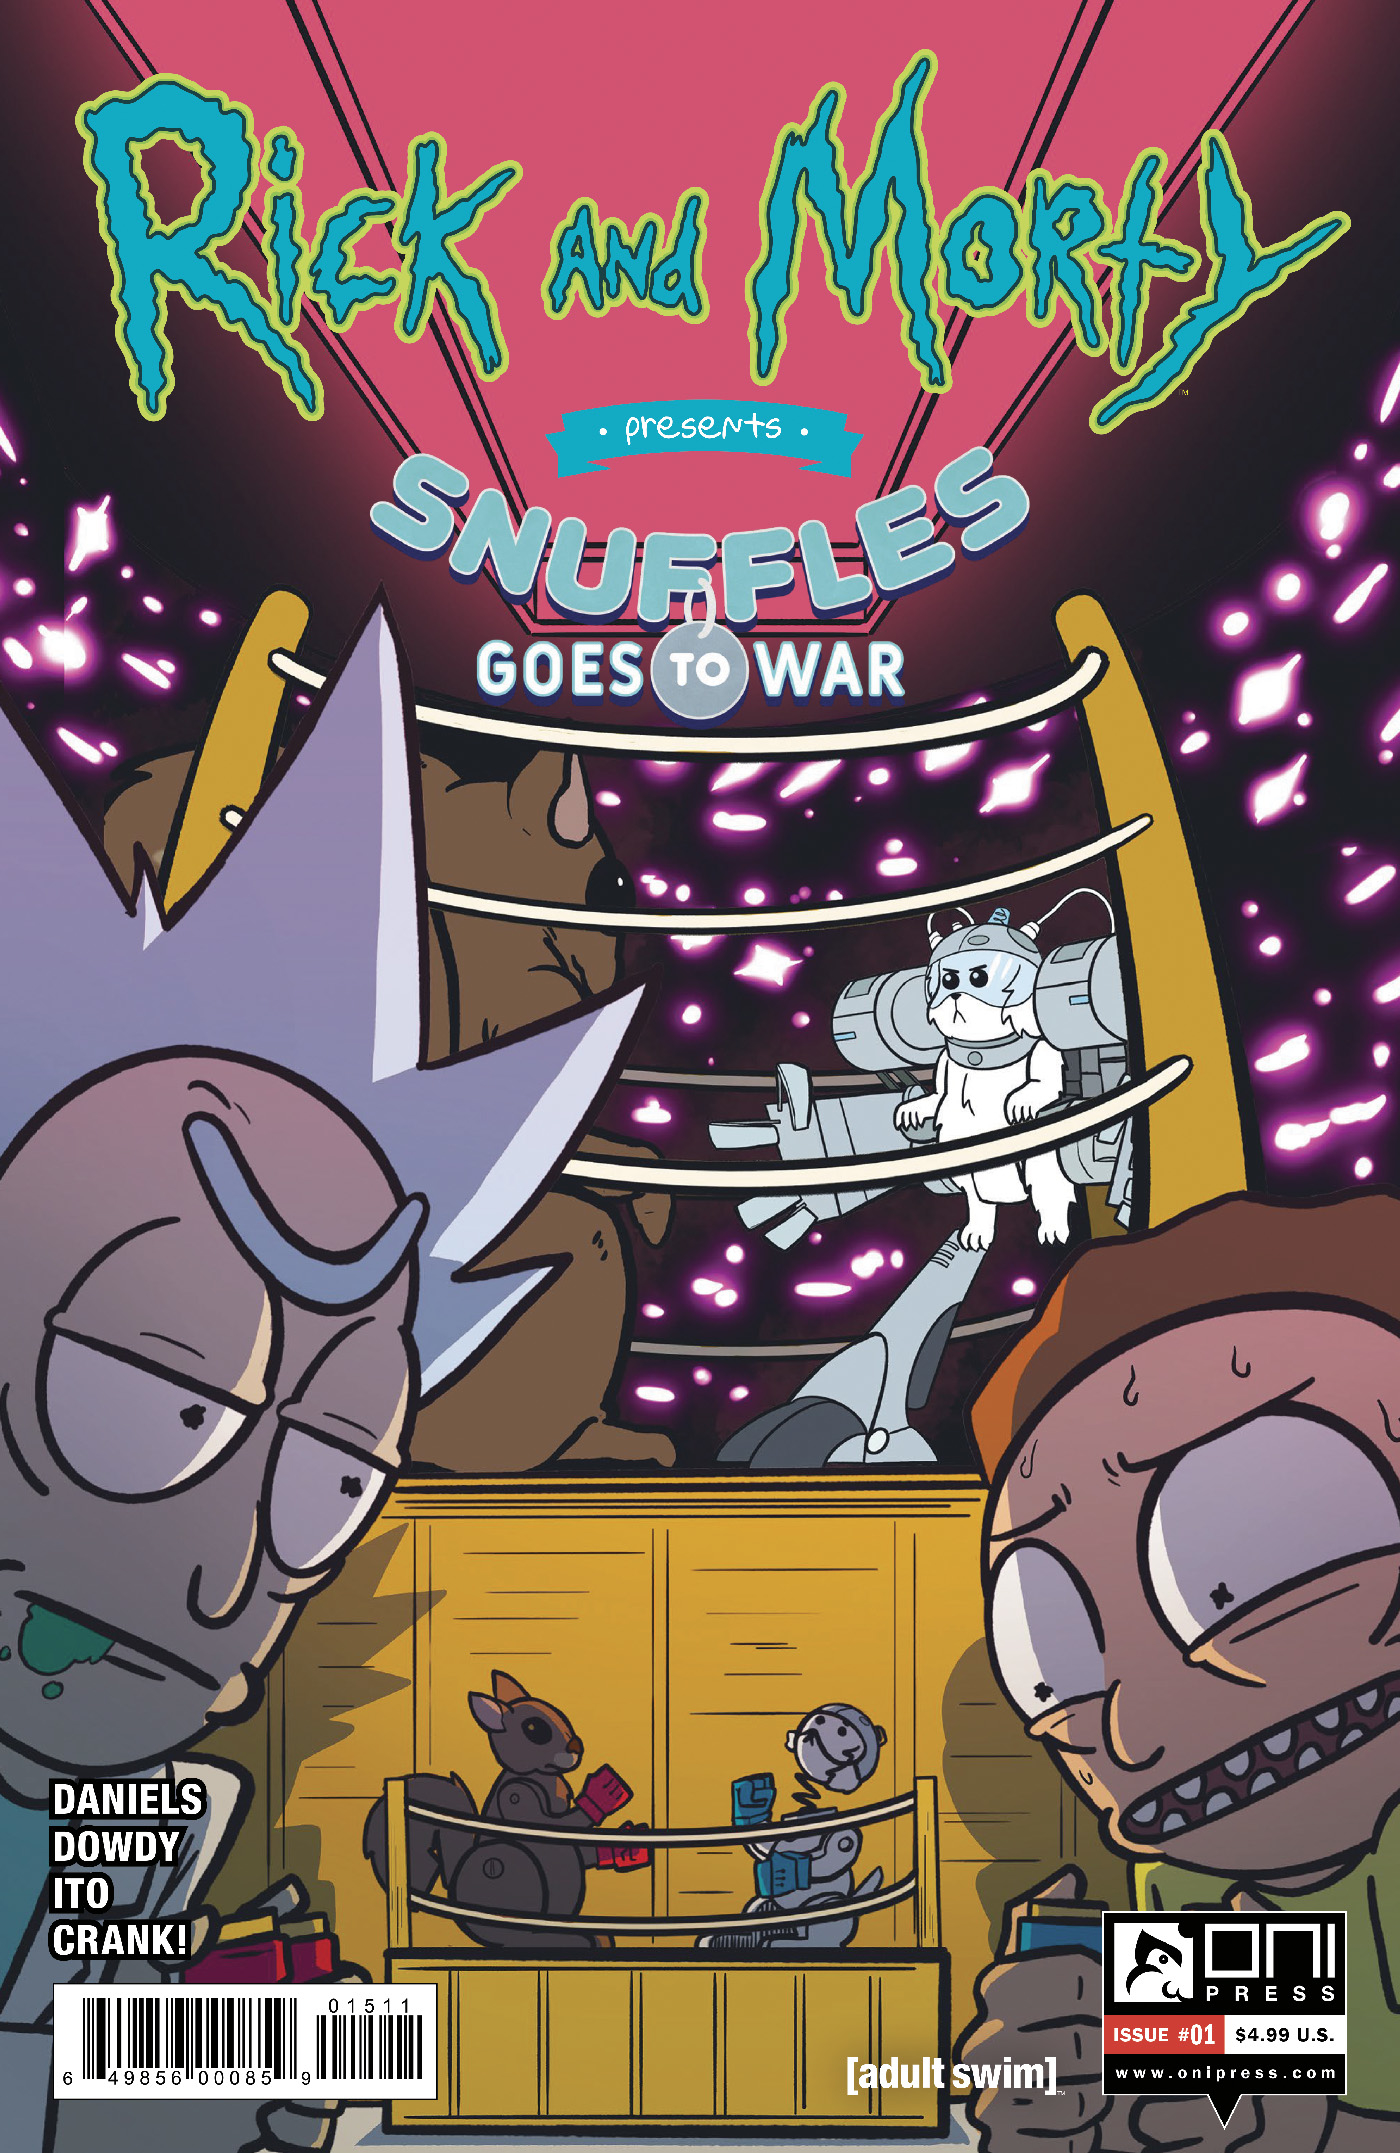 Rick & Morty Presents Snuffles Goes To War #1 Cover A Dowdy